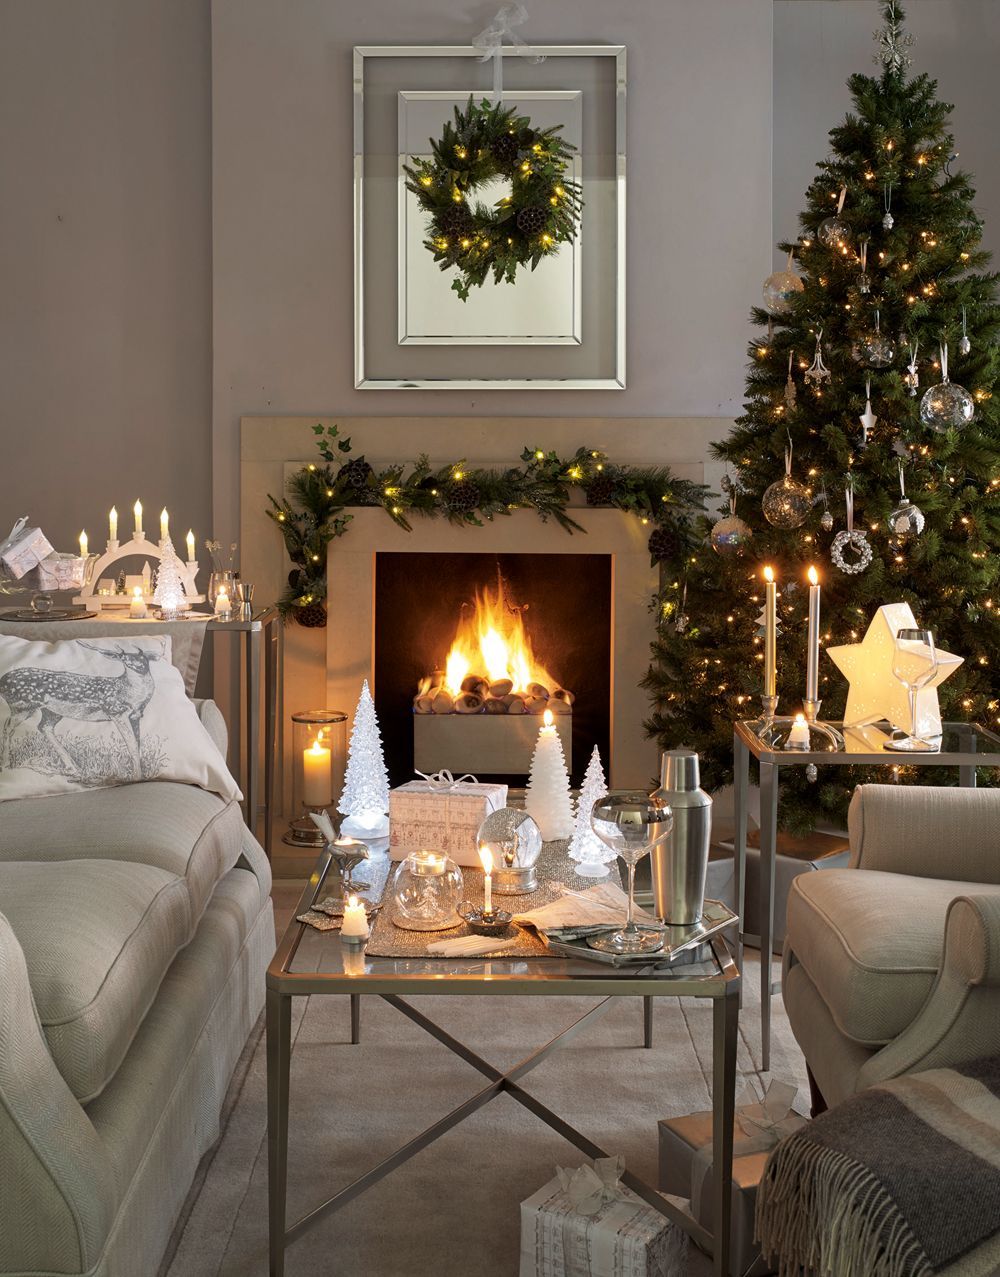 Laura Ashley Christmas – Everything You Could Wish For!